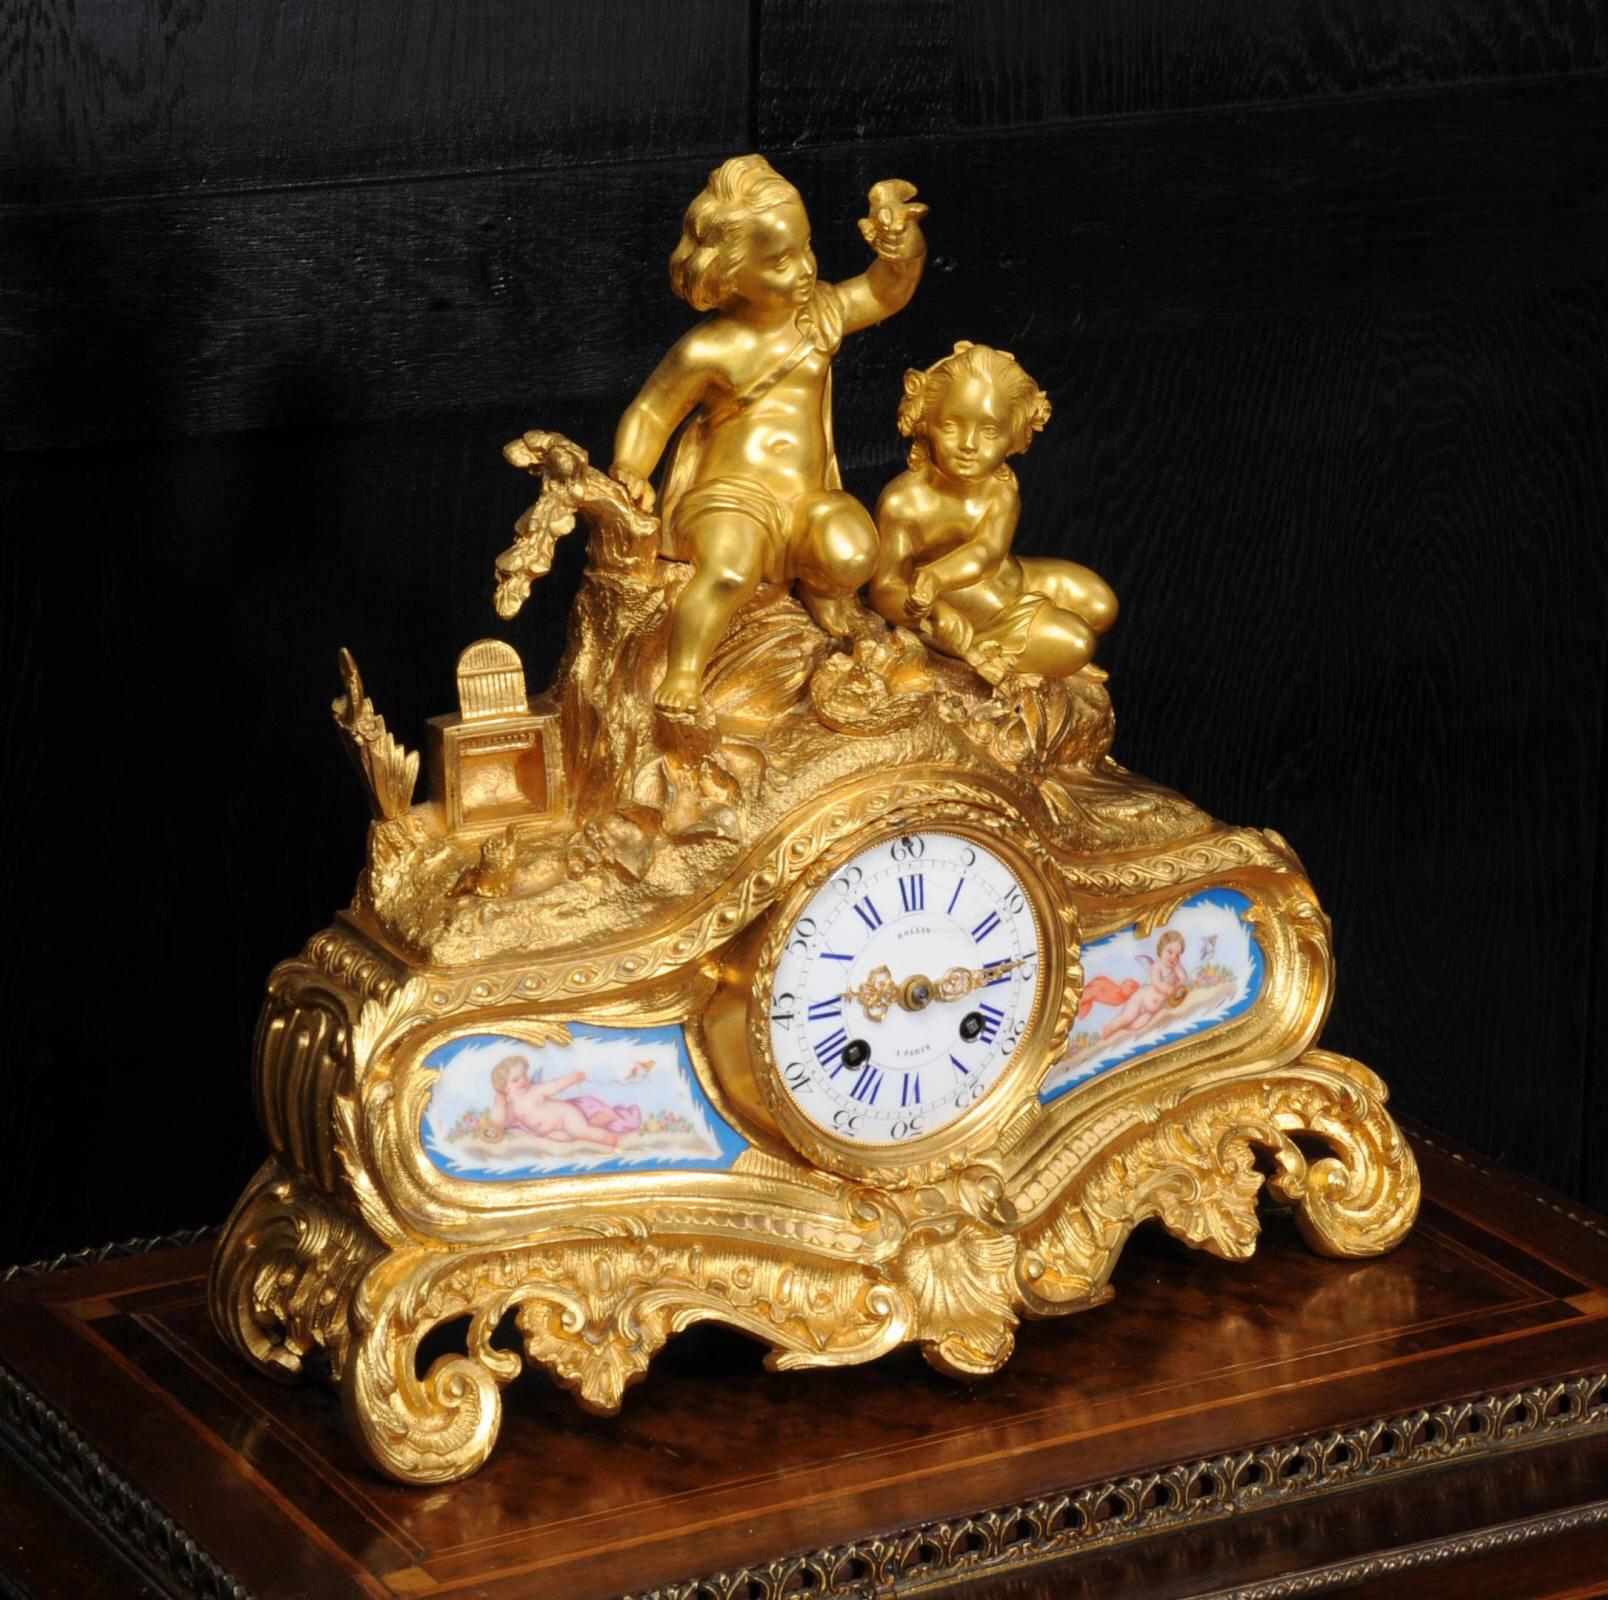 Rococo Fine Early Ormolu and Sevres Porcelain Boudoir Clock, Japy Freres